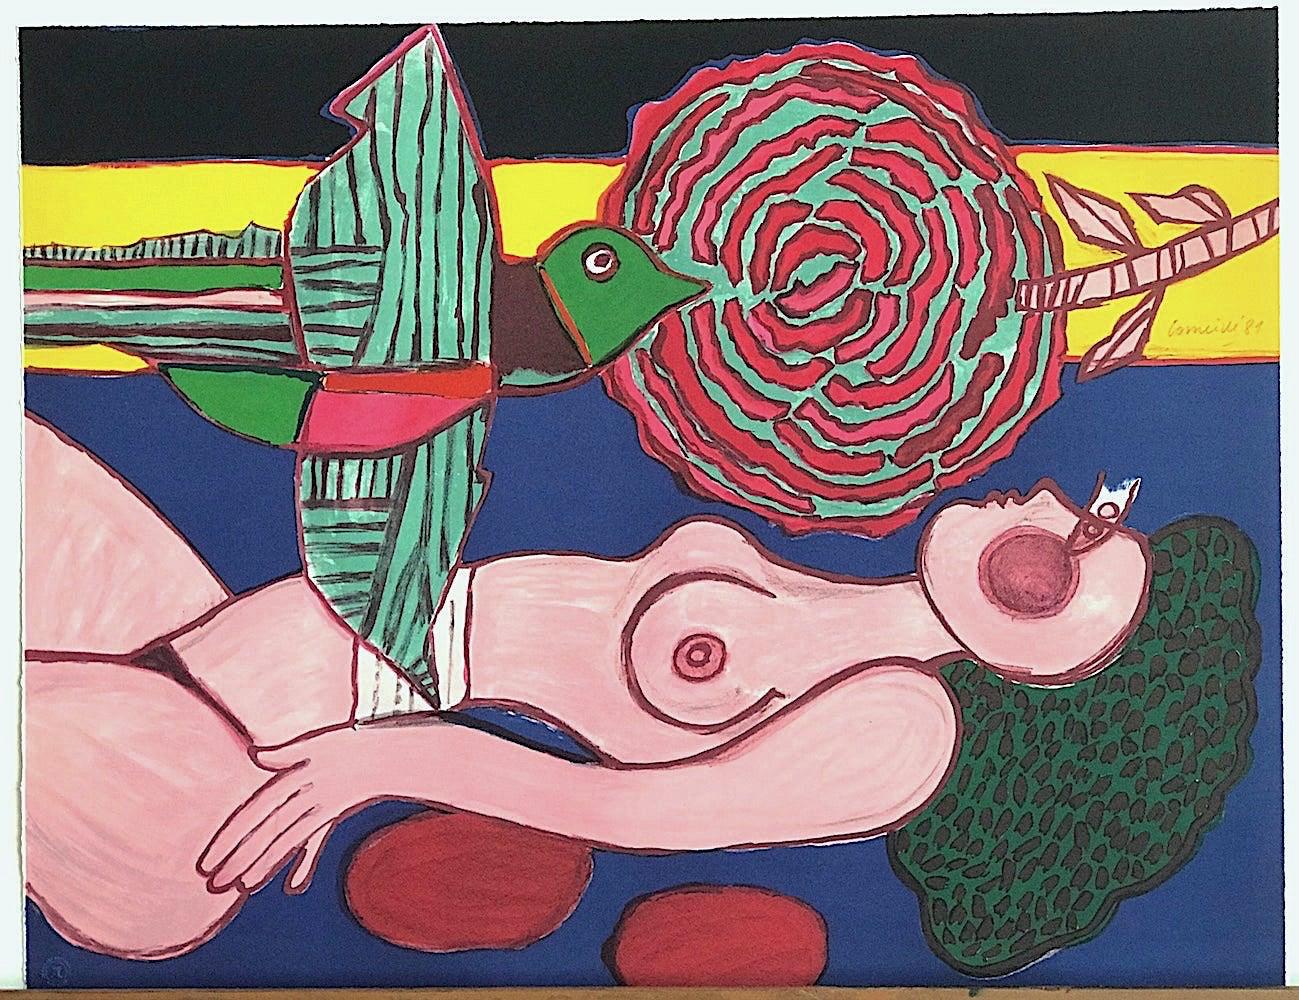 NU À LA ROSE Signed Lithograph, Reclining Nude Woman, Exotic Flying Bird, Flower - Contemporary Print by Corneille